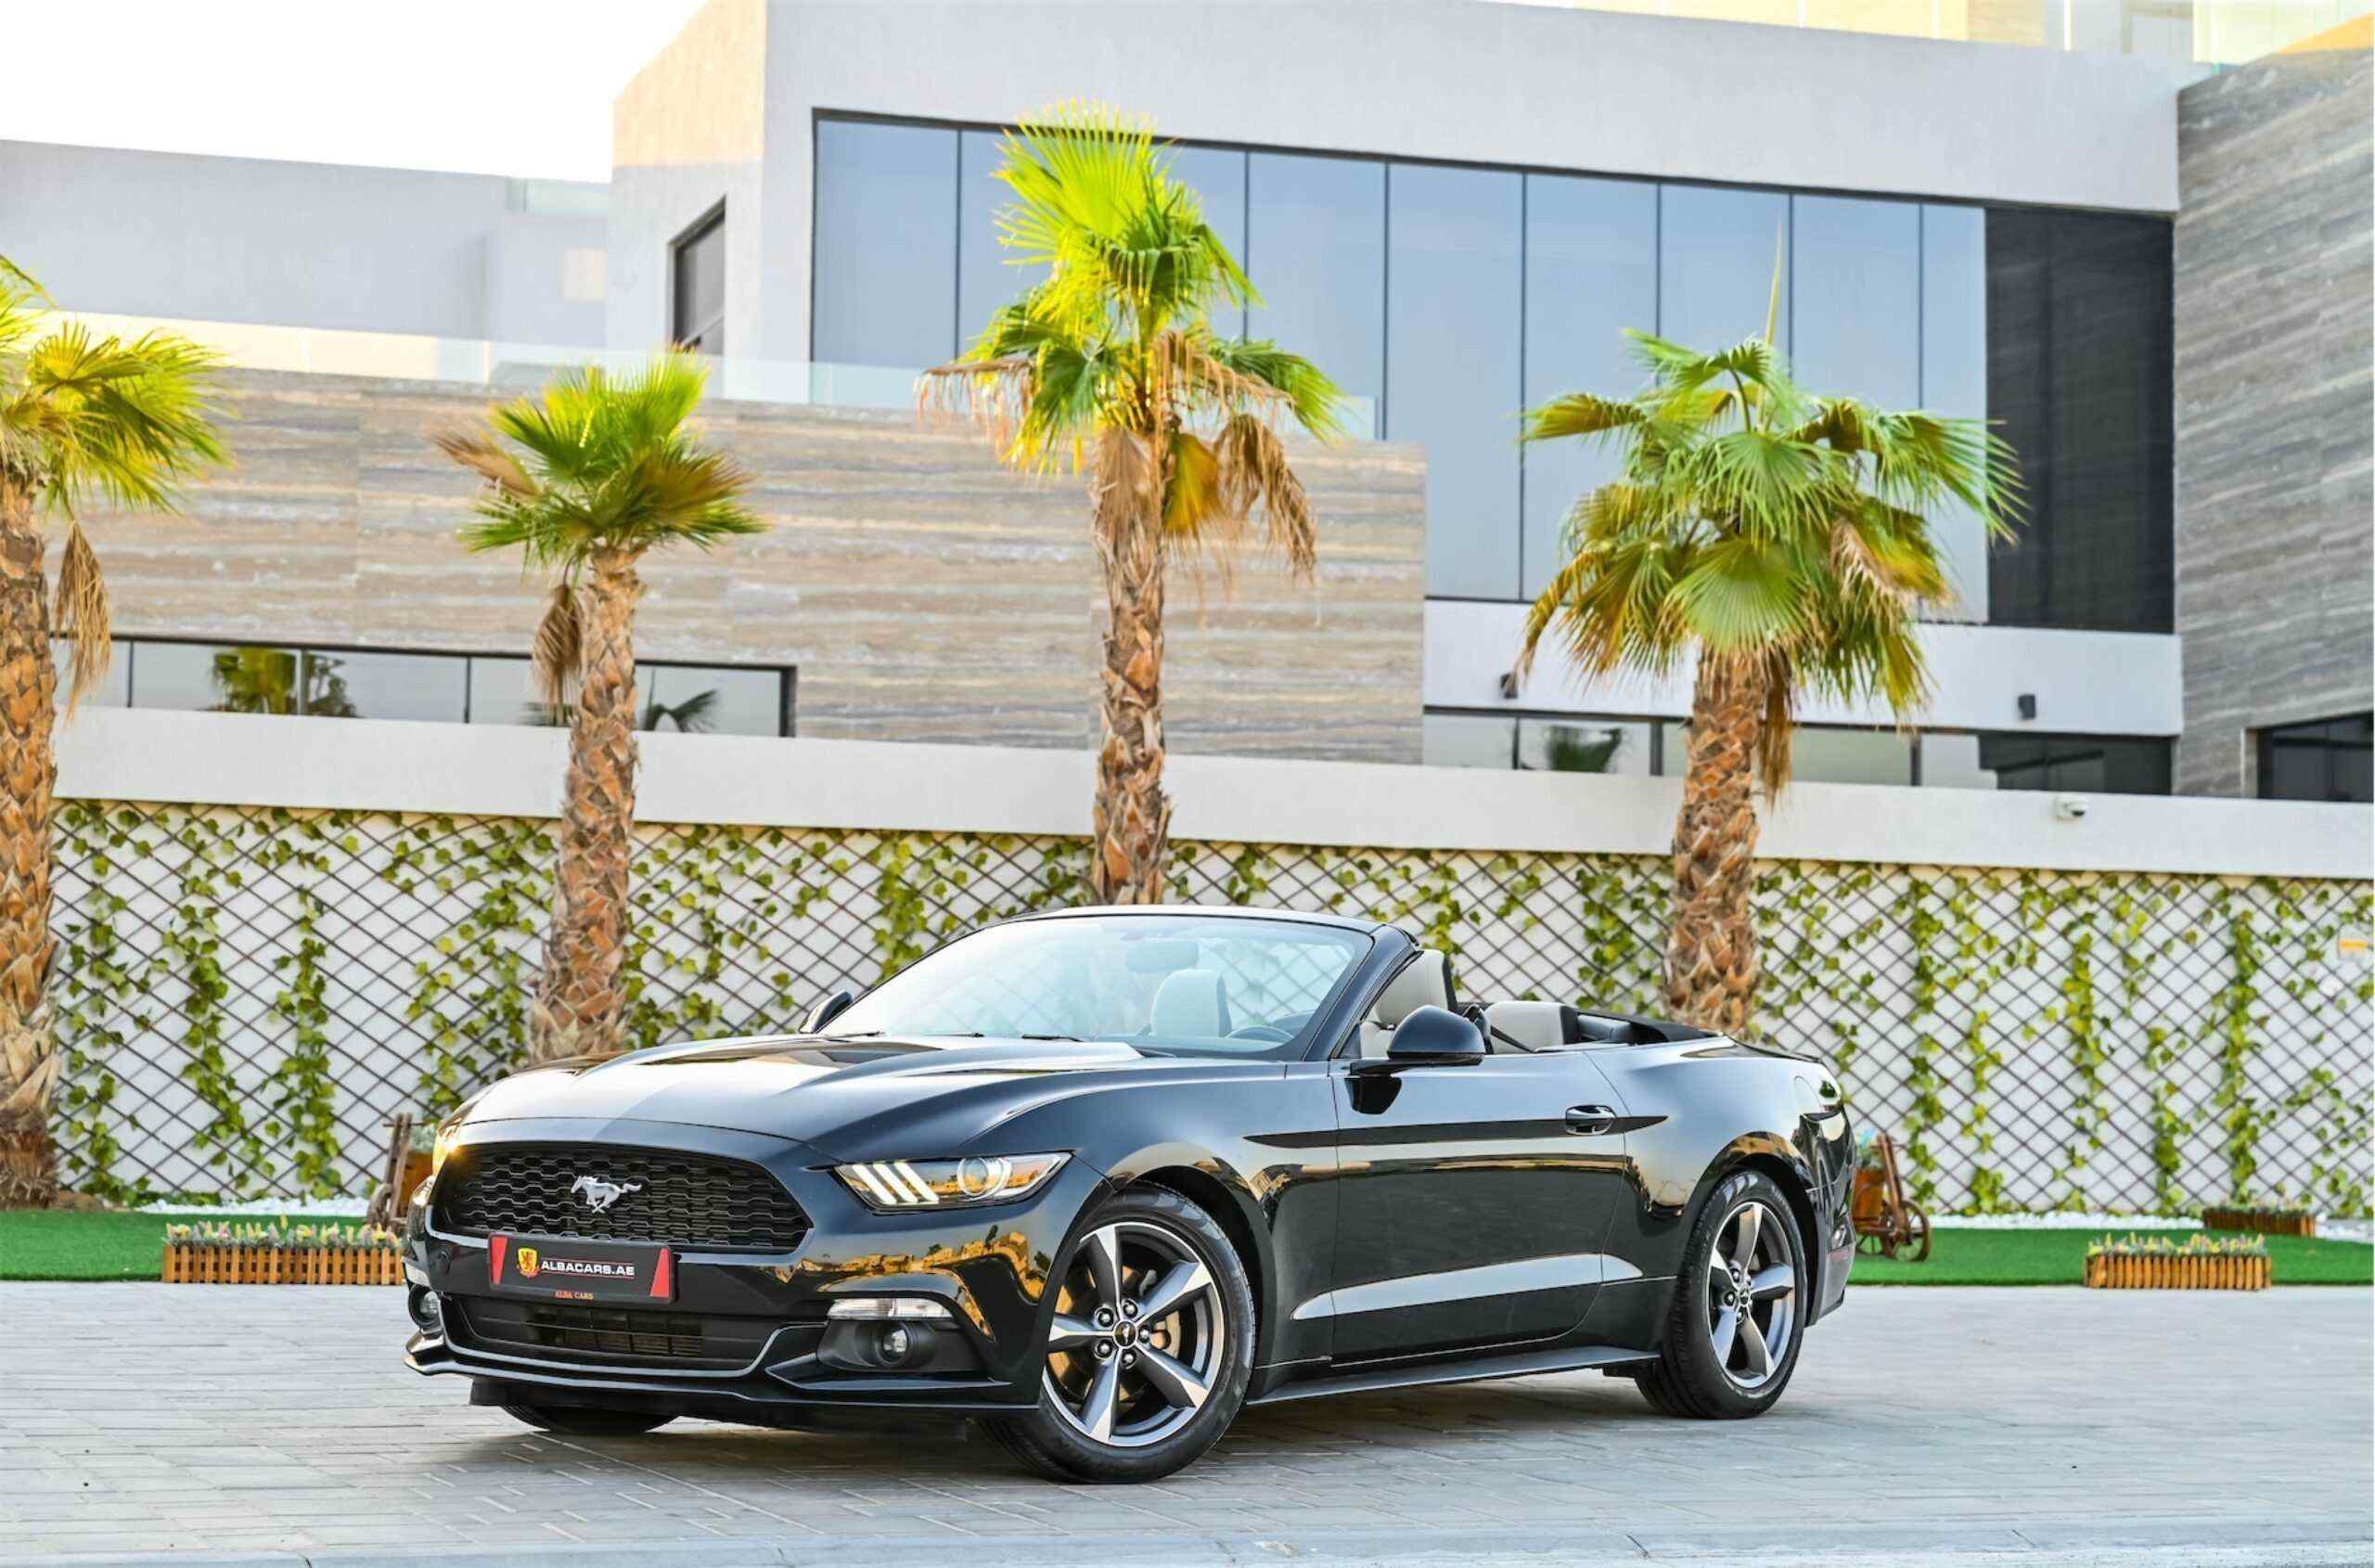 Top 7 Best Mustang Convertible Cars for Sale in Jumeirah Lake Towers